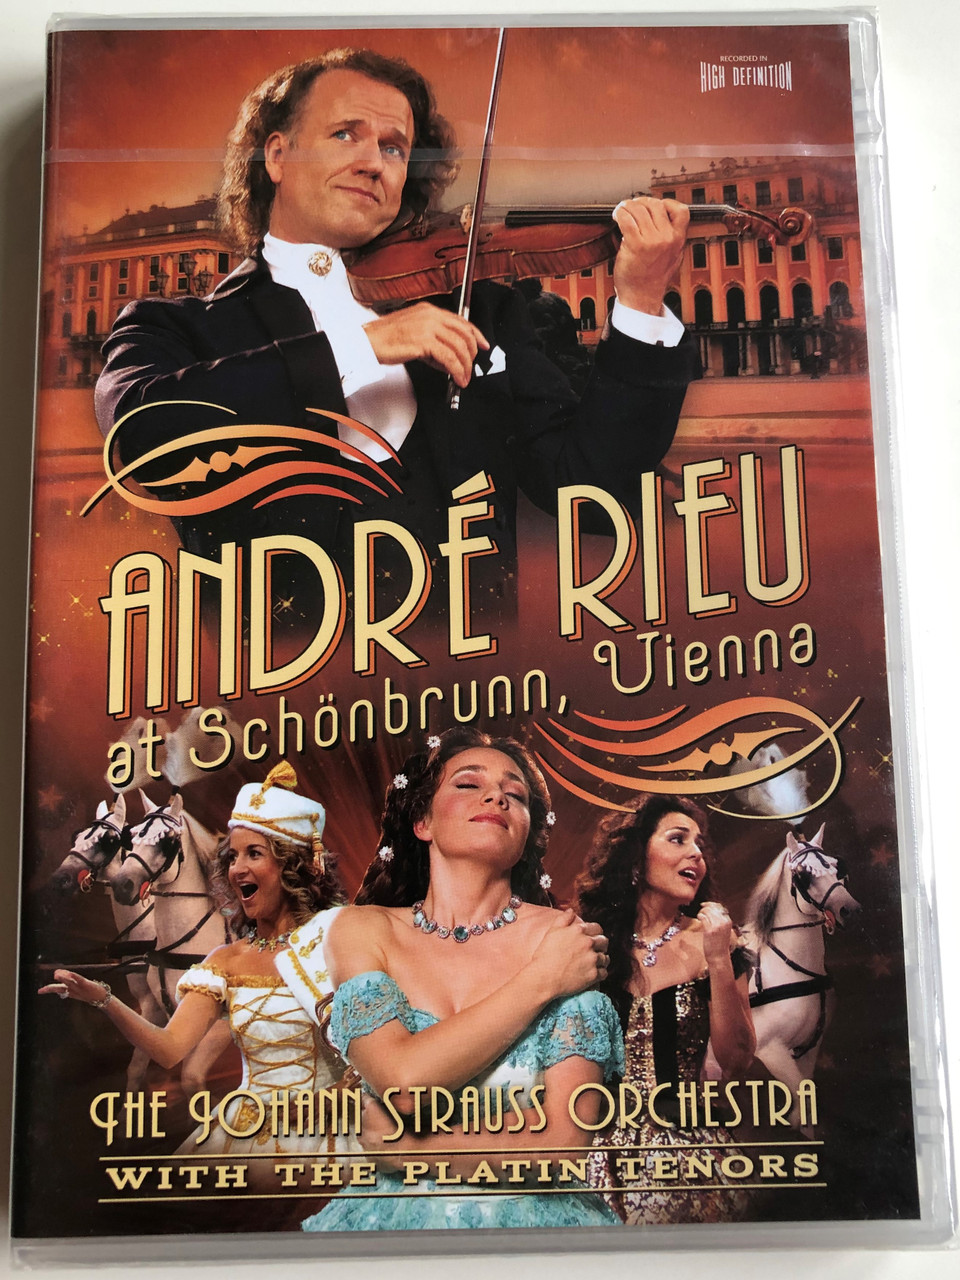 André rieu at Schönbrunn Vienna DVD The Johann Strauss Orchestra with the  Platin Tenors / Directed by Pit Weyrich / The Gypsy Princess, Heia in the  Mountains, The Beautiful blue Danube - bibleinmylanguage